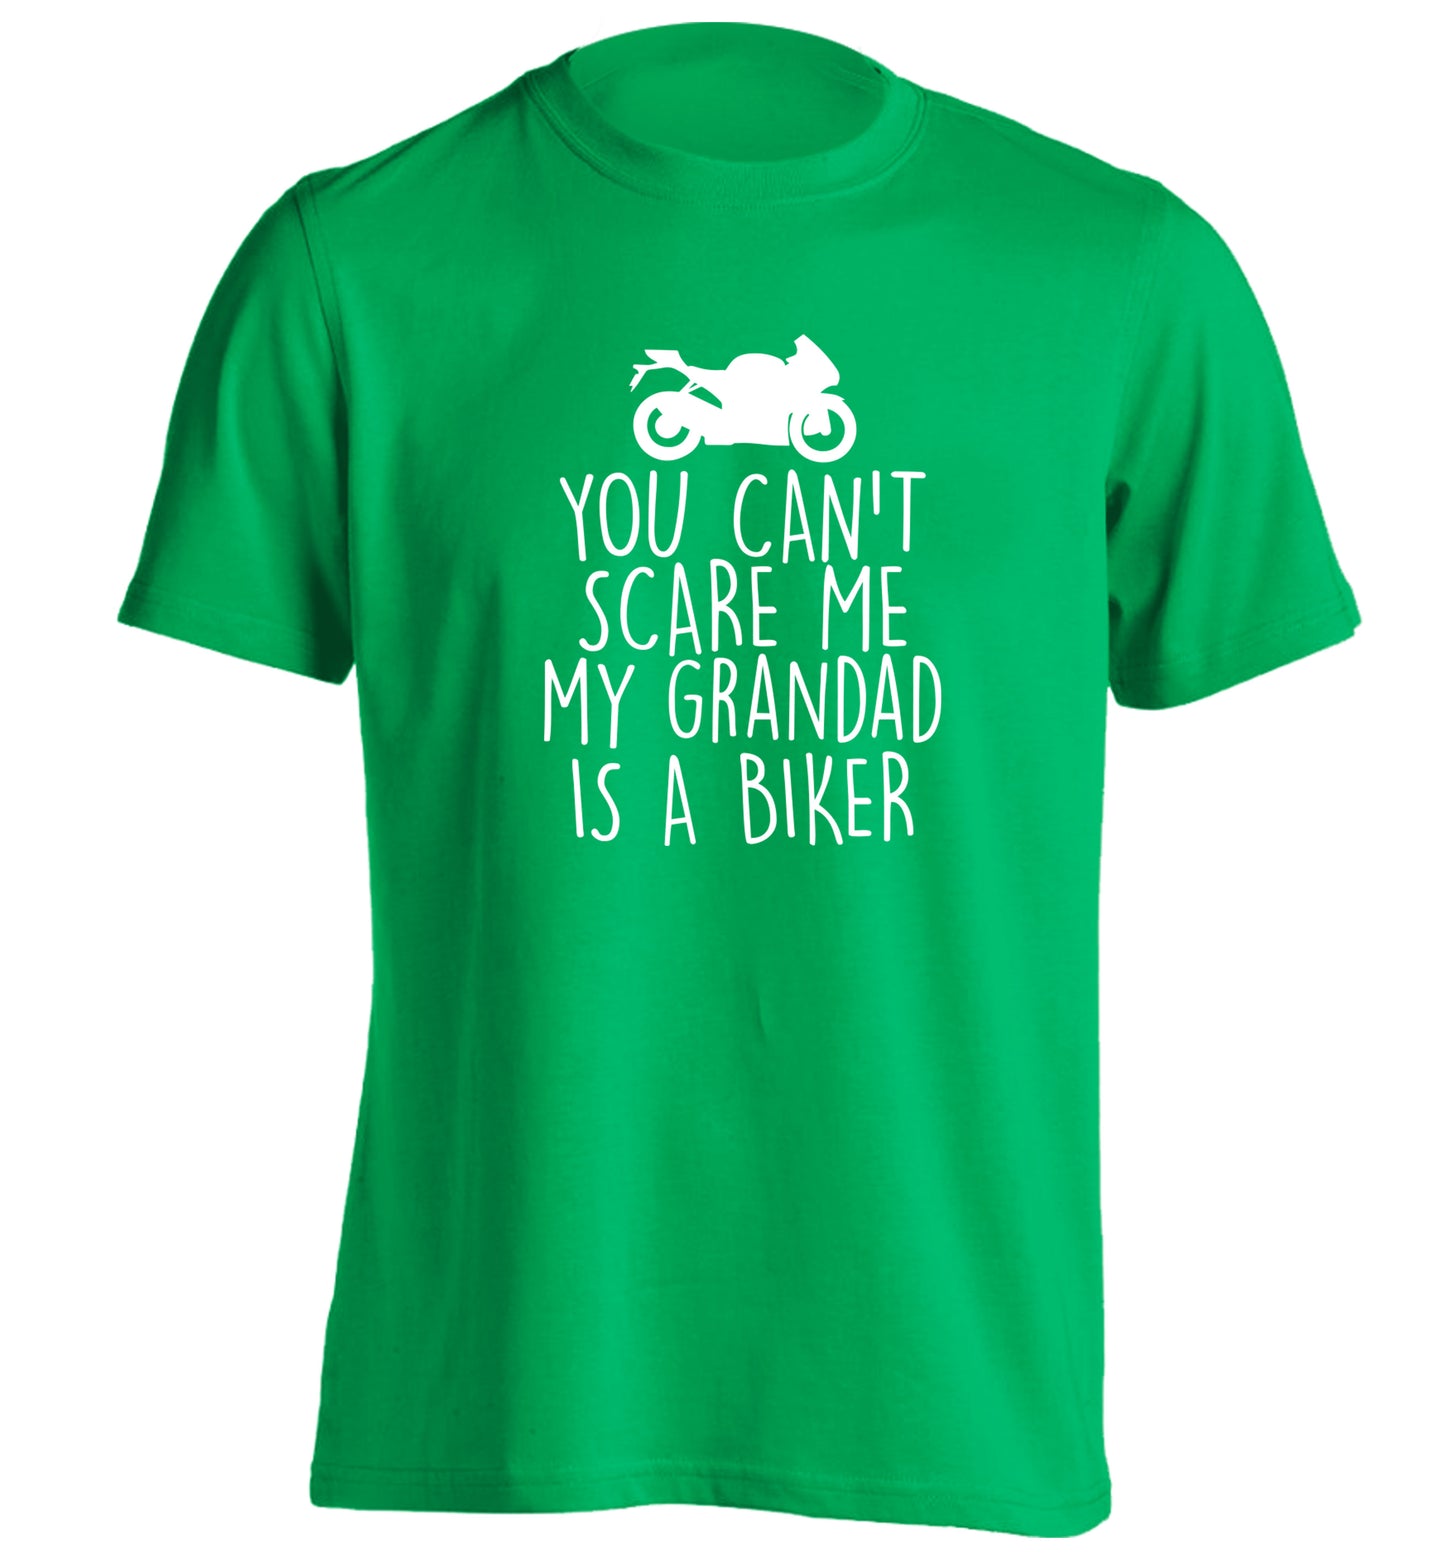 You can't scare me my grandad is a biker adults unisex green Tshirt 2XL